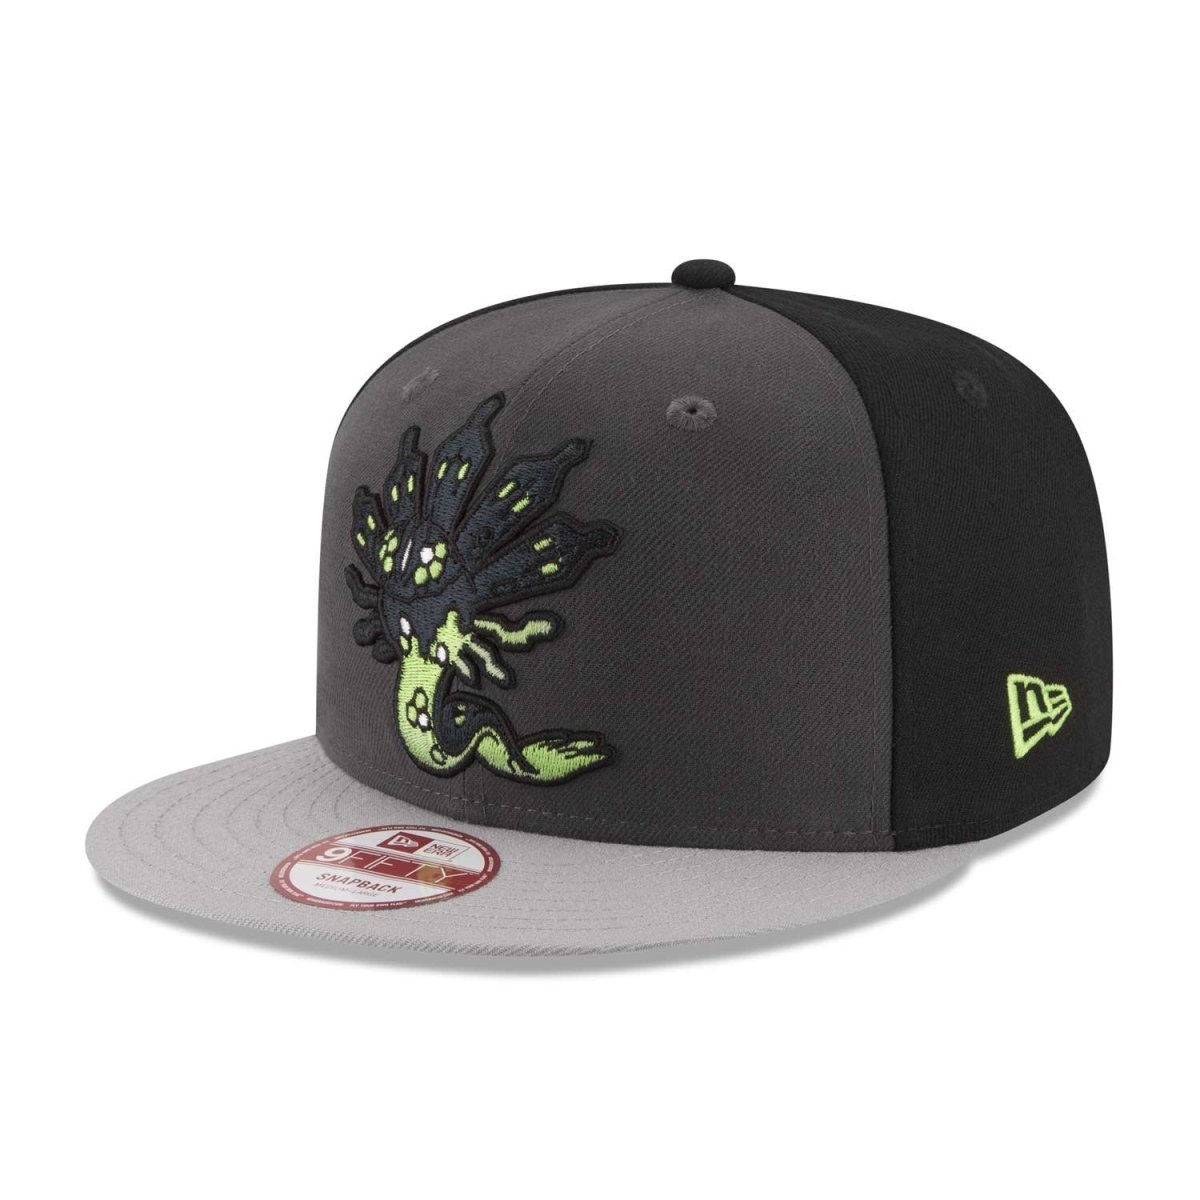 Zygarde 50% Forme 9FIFTY by Cap Baseball New Site Official Size-Adult) Pokémon | Center (One Era